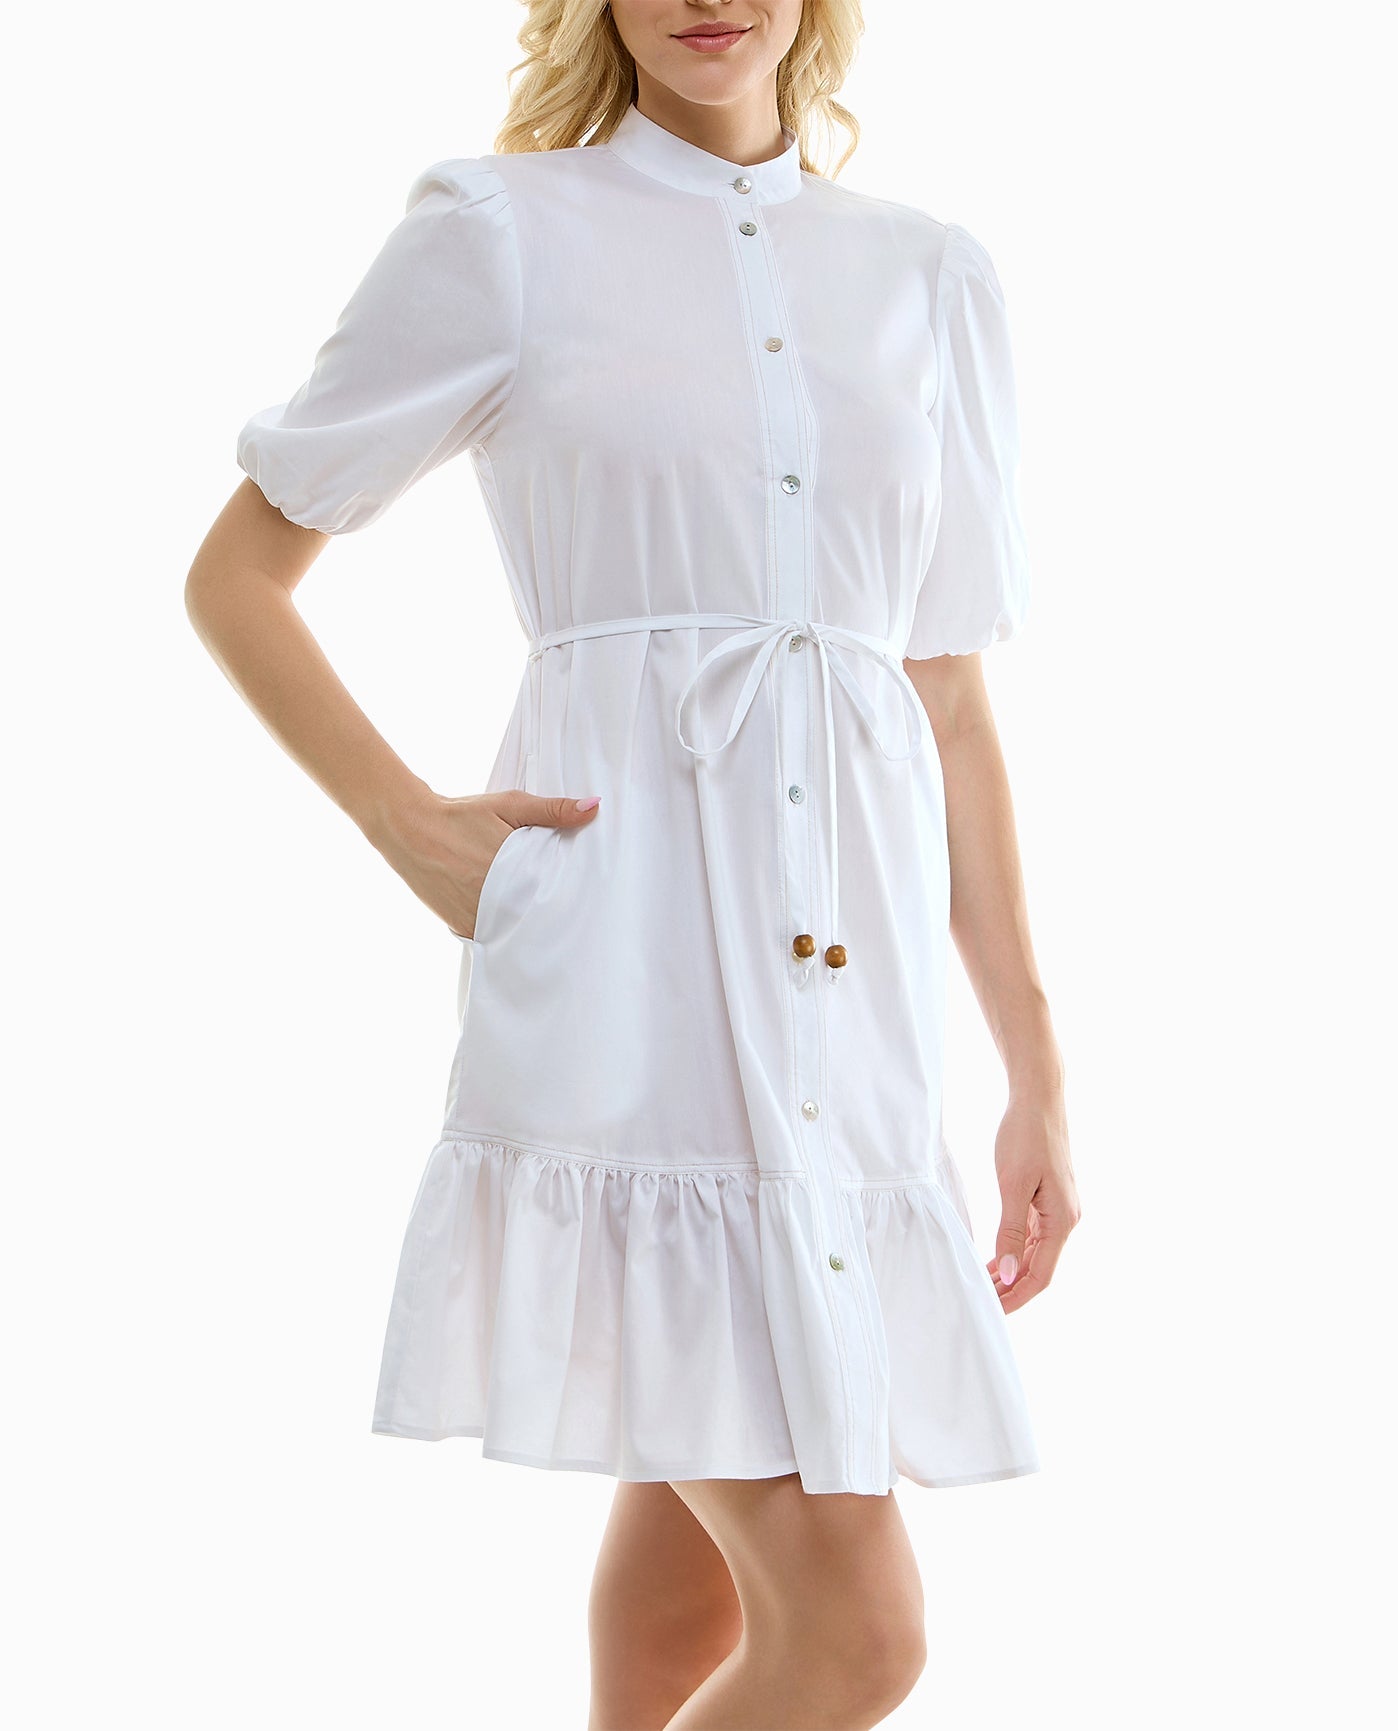 SIDE OF CRYSTAL STRETCH POPLIN HALF SLEEVE TIERED SHIRT DRESS | Brilliant White and Sand